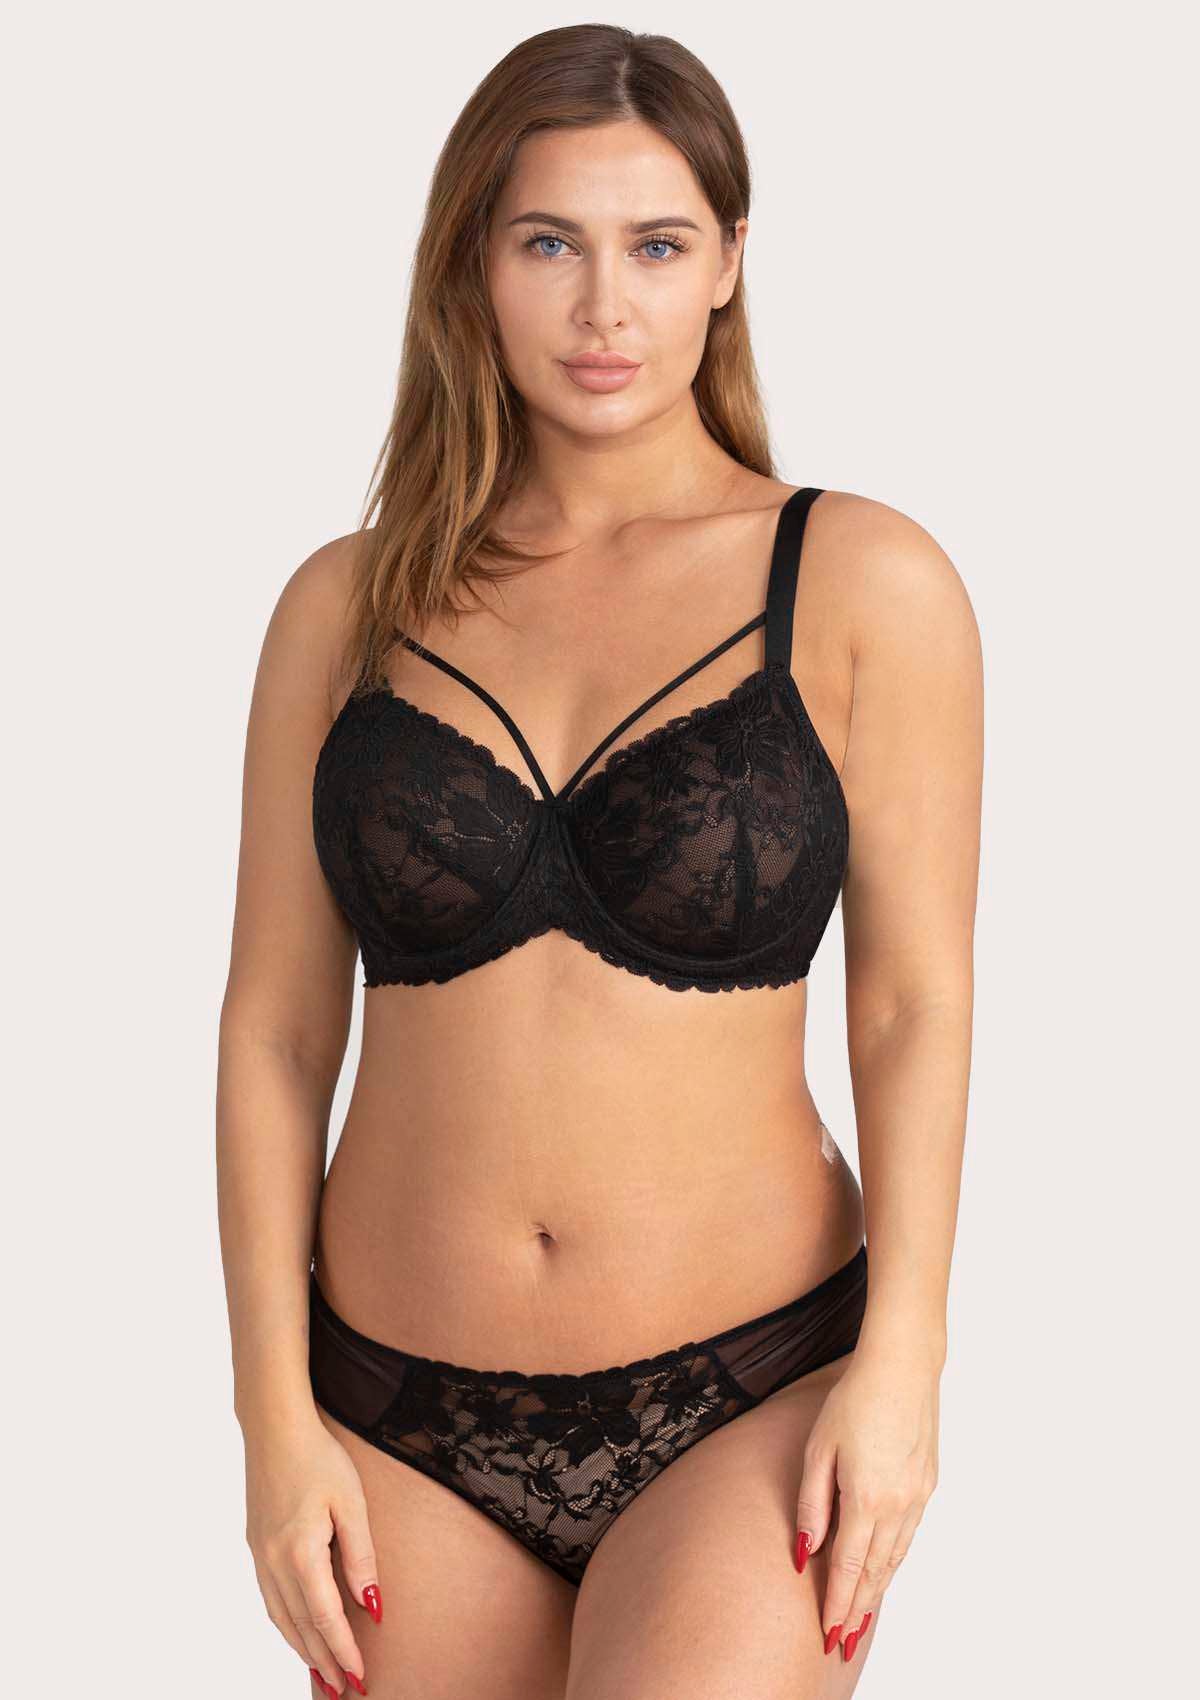 HSIA Pretty In Petals Lace Bra And Panty Set: Non Padded Wired Bra - Black / 46 / DDD/F